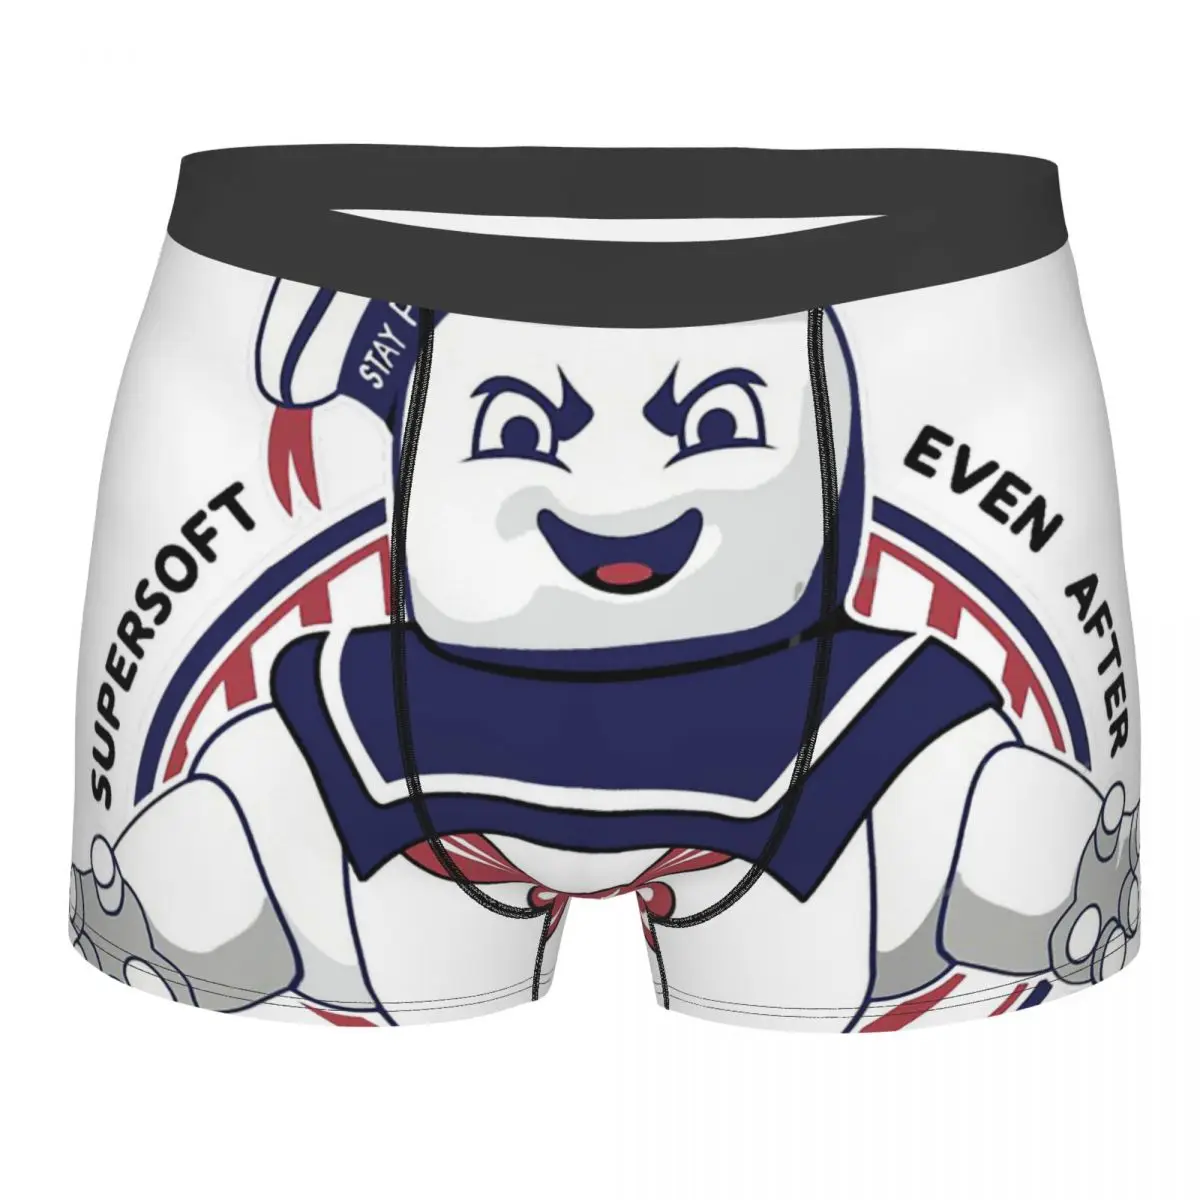 

Ghostbusters Stay Puft Marshmallows Man's Boxer Briefs Breathable Creative Underwear High Quality Print Shorts Gift Idea